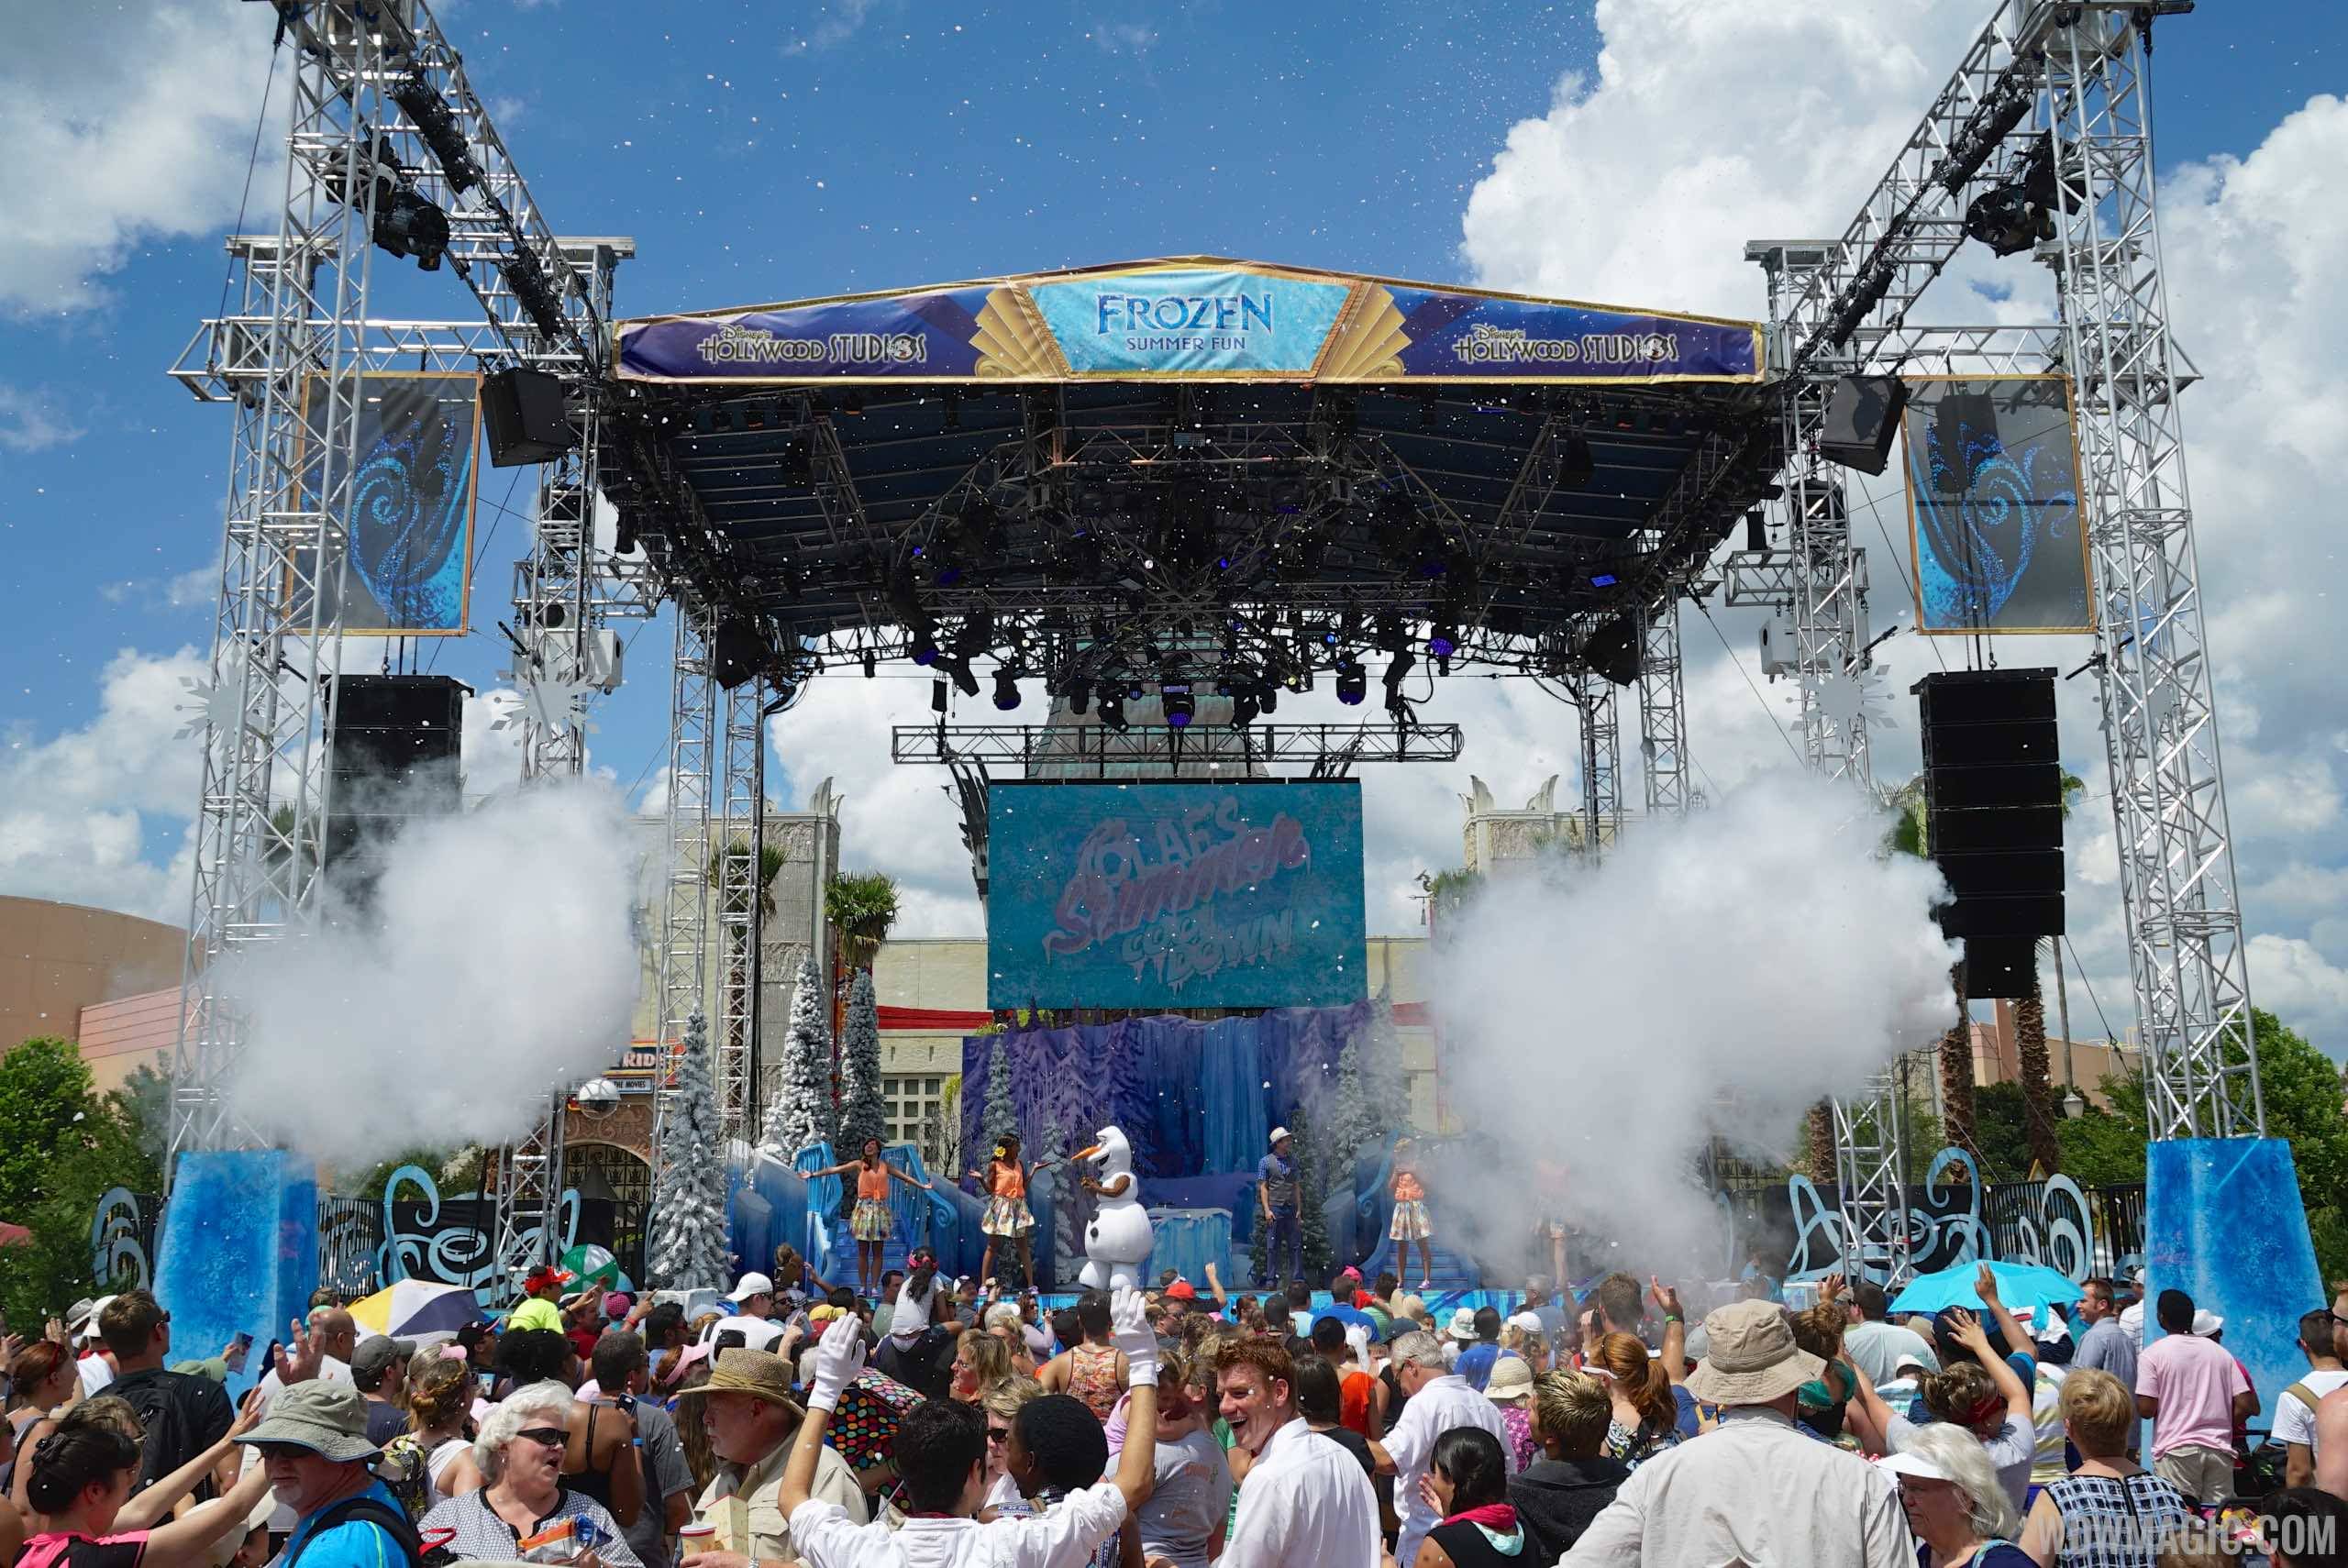 'Frozen Summer Fun' Premium Package to be offered throughout the summer at Disney's Hollywood Studios